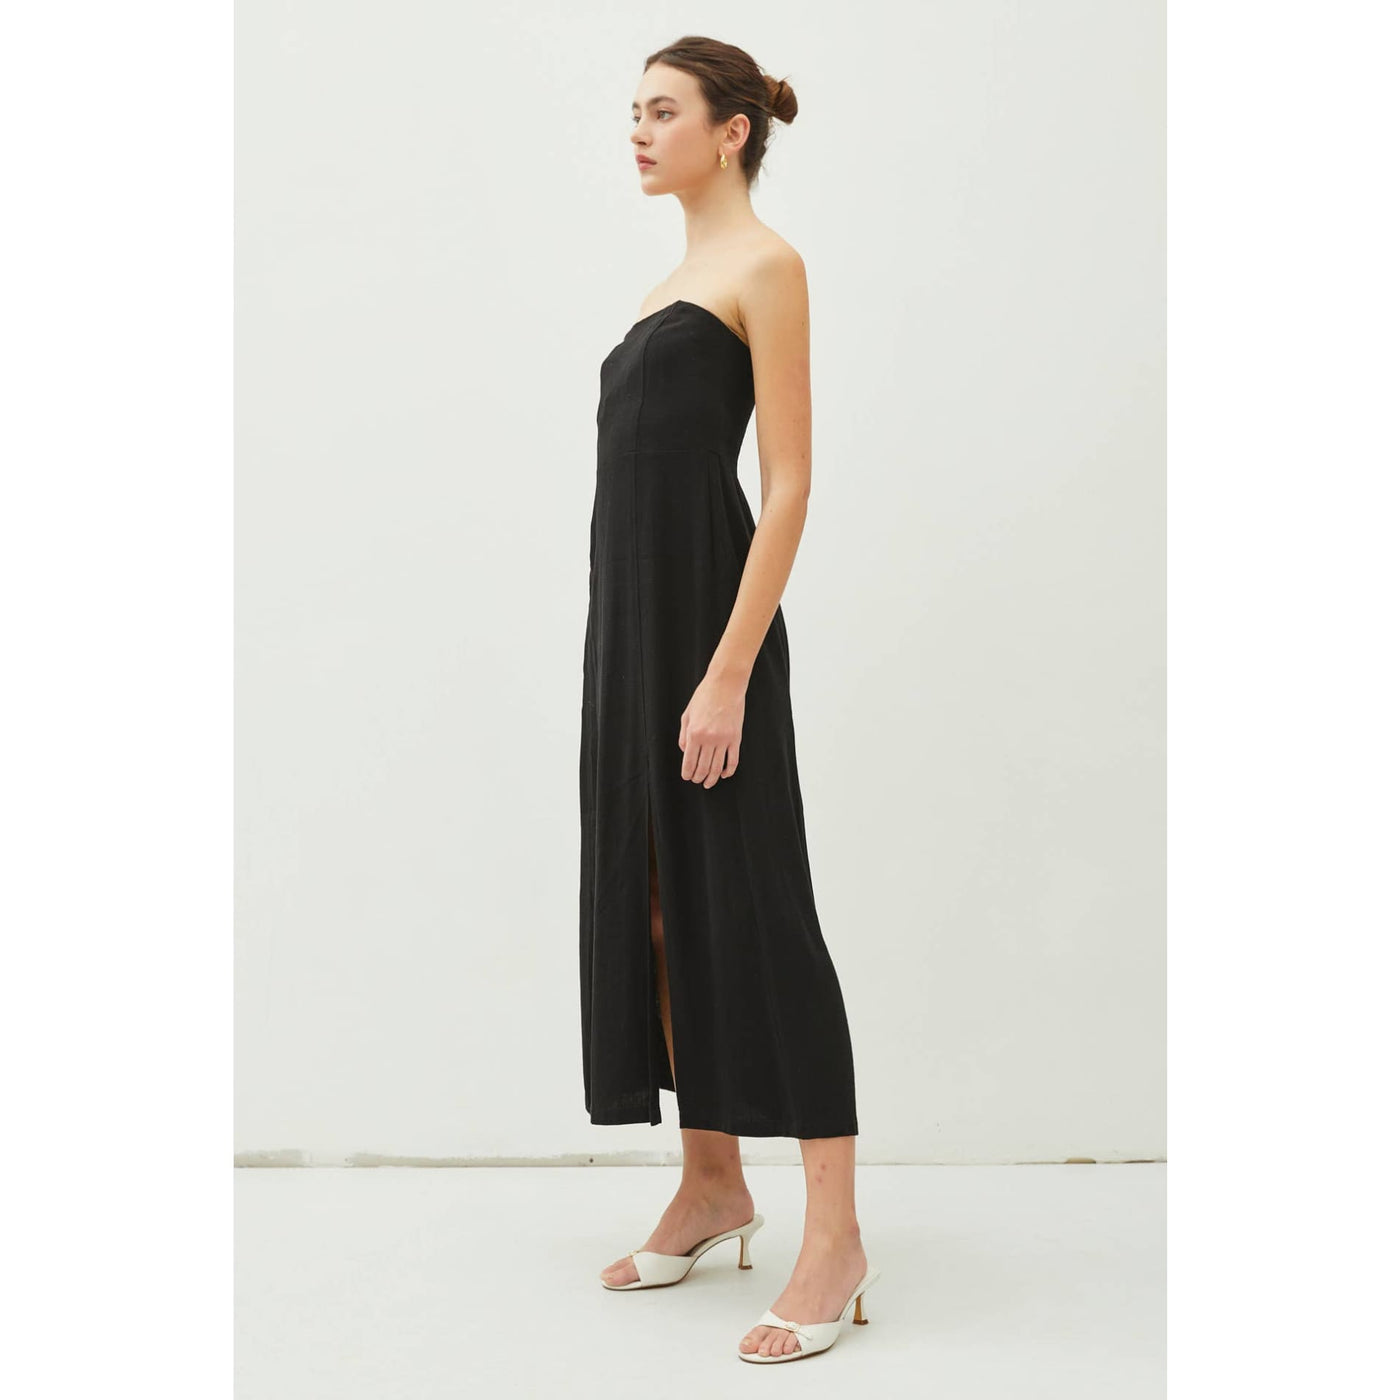 Drawing The Line Maxi Dress - 170 Casual Dresses/Jumpsuits/Rompers